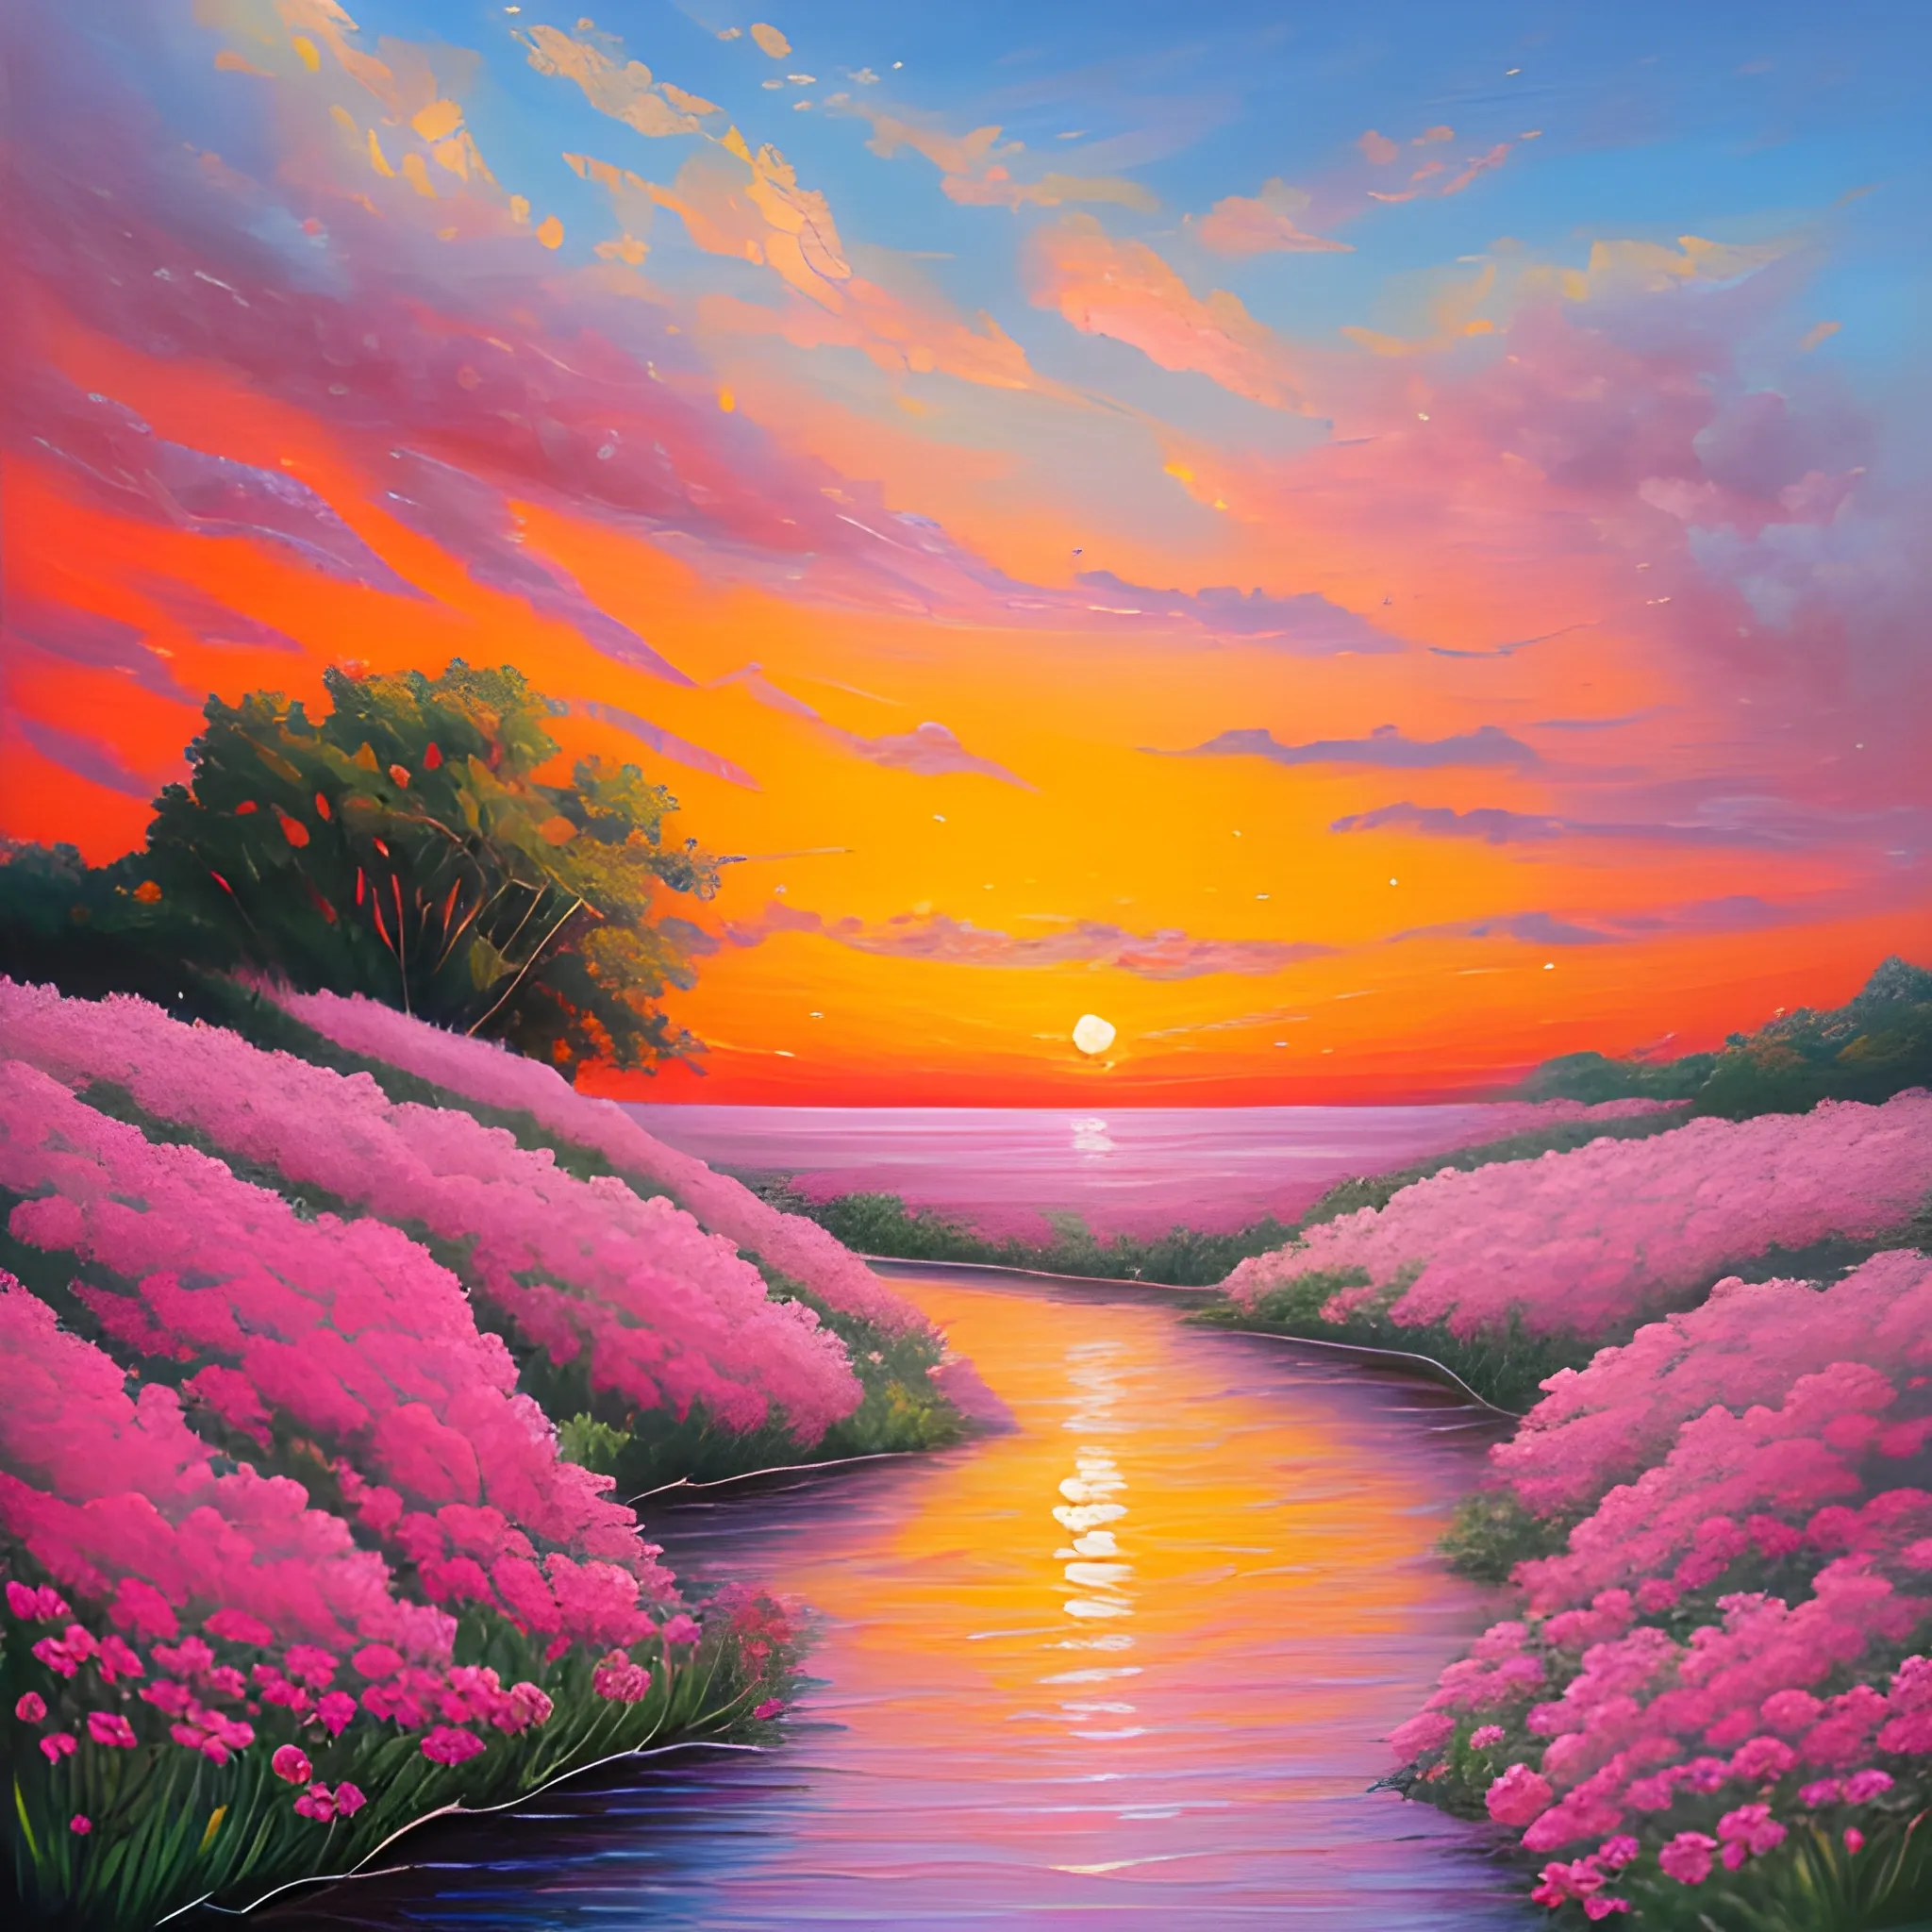 A landscape with pink flowers, a sunset, Oil Painting, 